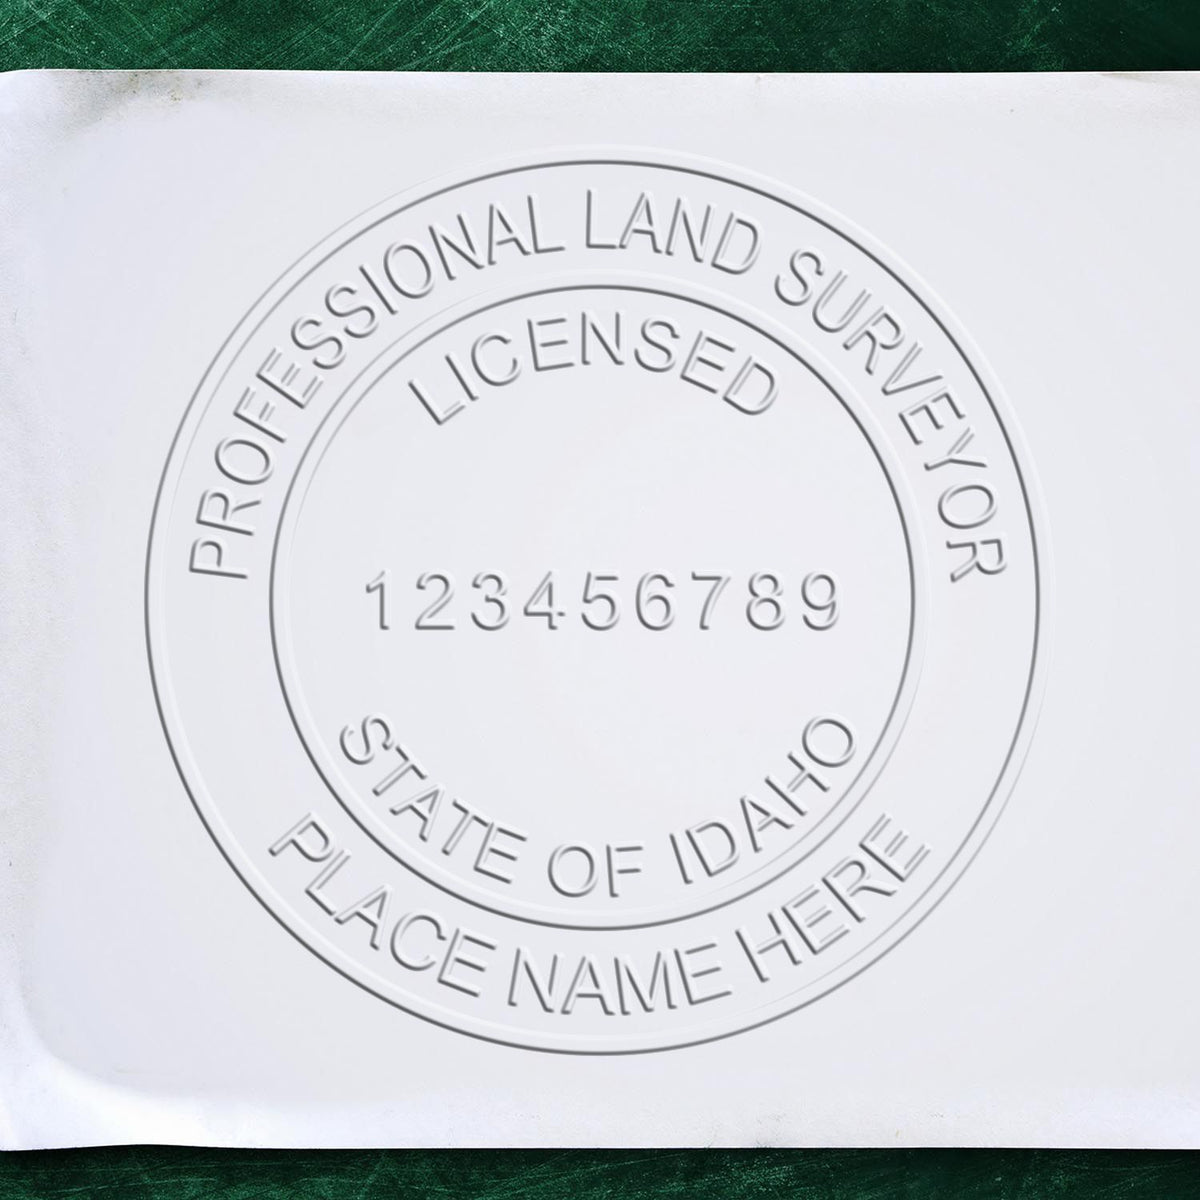 The Gift Idaho Land Surveyor Seal stamp impression comes to life with a crisp, detailed image stamped on paper - showcasing true professional quality.